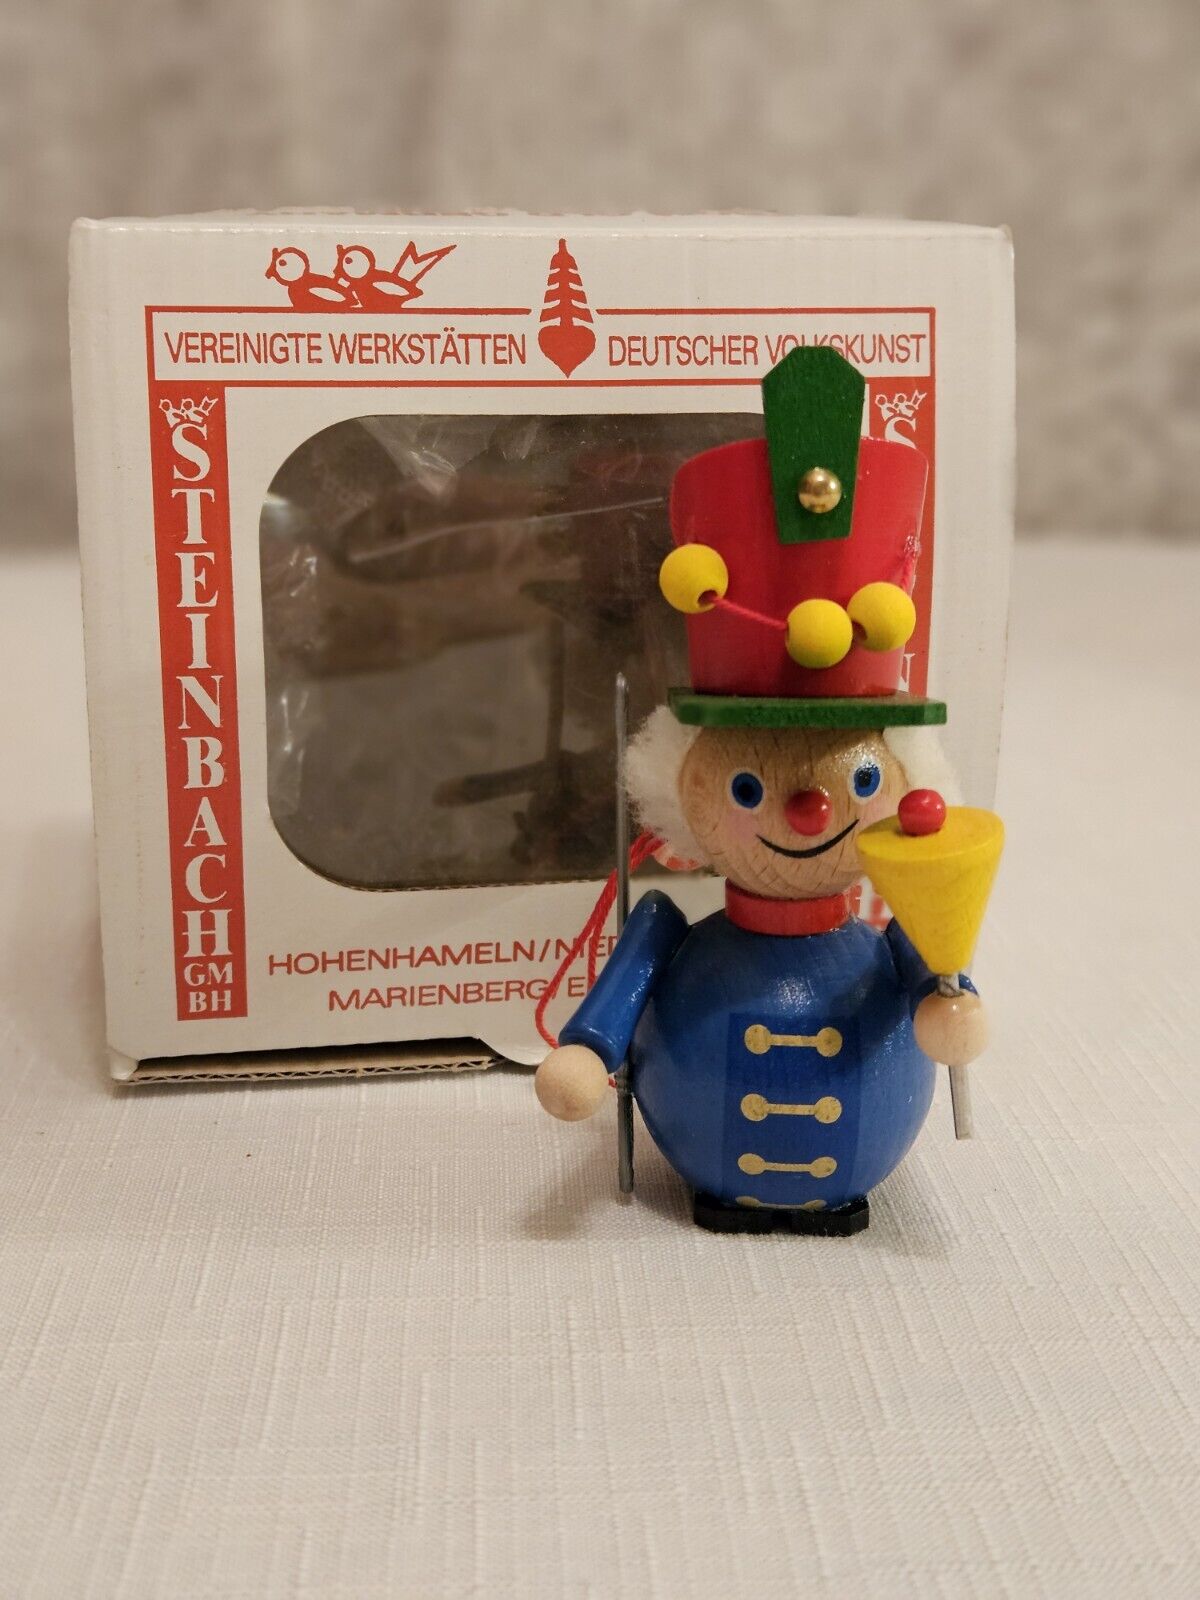 Vintage Steinbach Germany 3” Wooden German Soldier Christmas Ornament Boxed